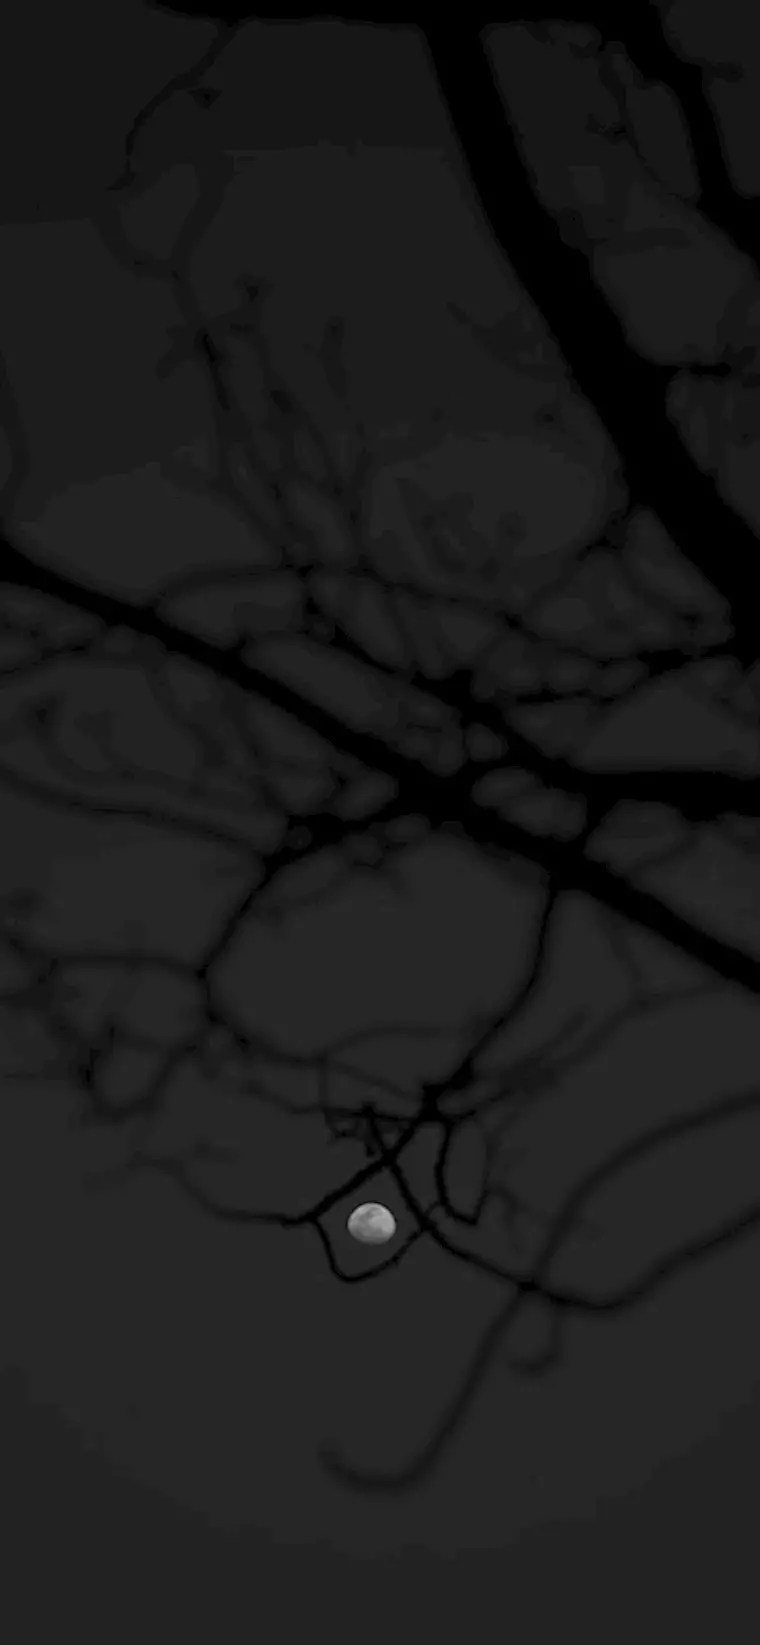 A black and white photo of trees in the dark - Android